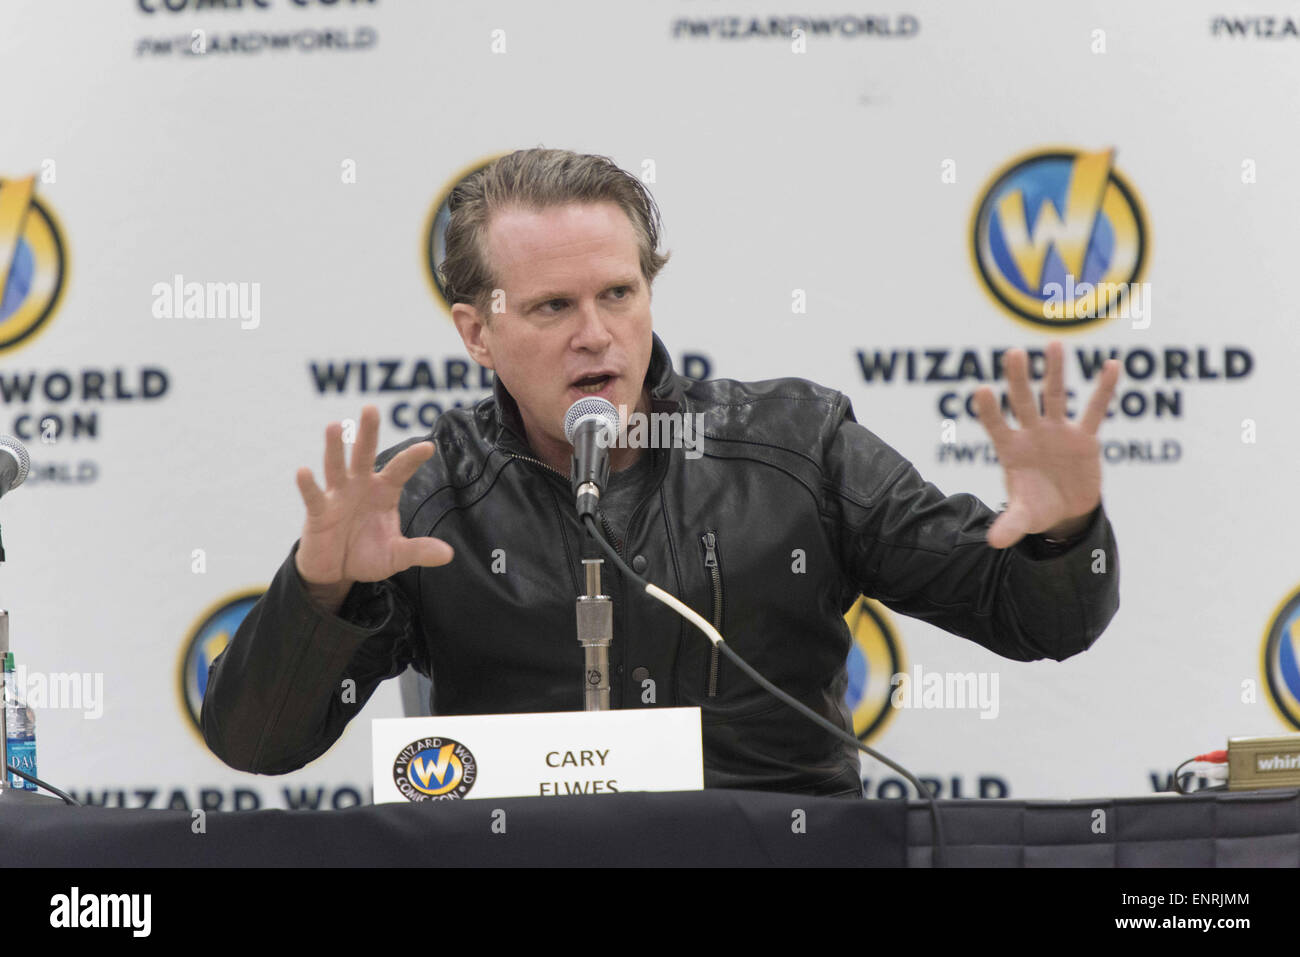 Philadelphia, Pennsylvania, USA. 10th May, 2015. English actor, screenwriter, producer and best-selling author, CARY ELWES, known for his roles in The Princess Bride, Robin Hood: Men in Tights, Days of Thunder, Bram Stoker's Dracula, Hot Shots!, during a presser at Wizard World Comic Con convention. © Ricky Fitchett/ZUMA Wire/Alamy Live News Stock Photo